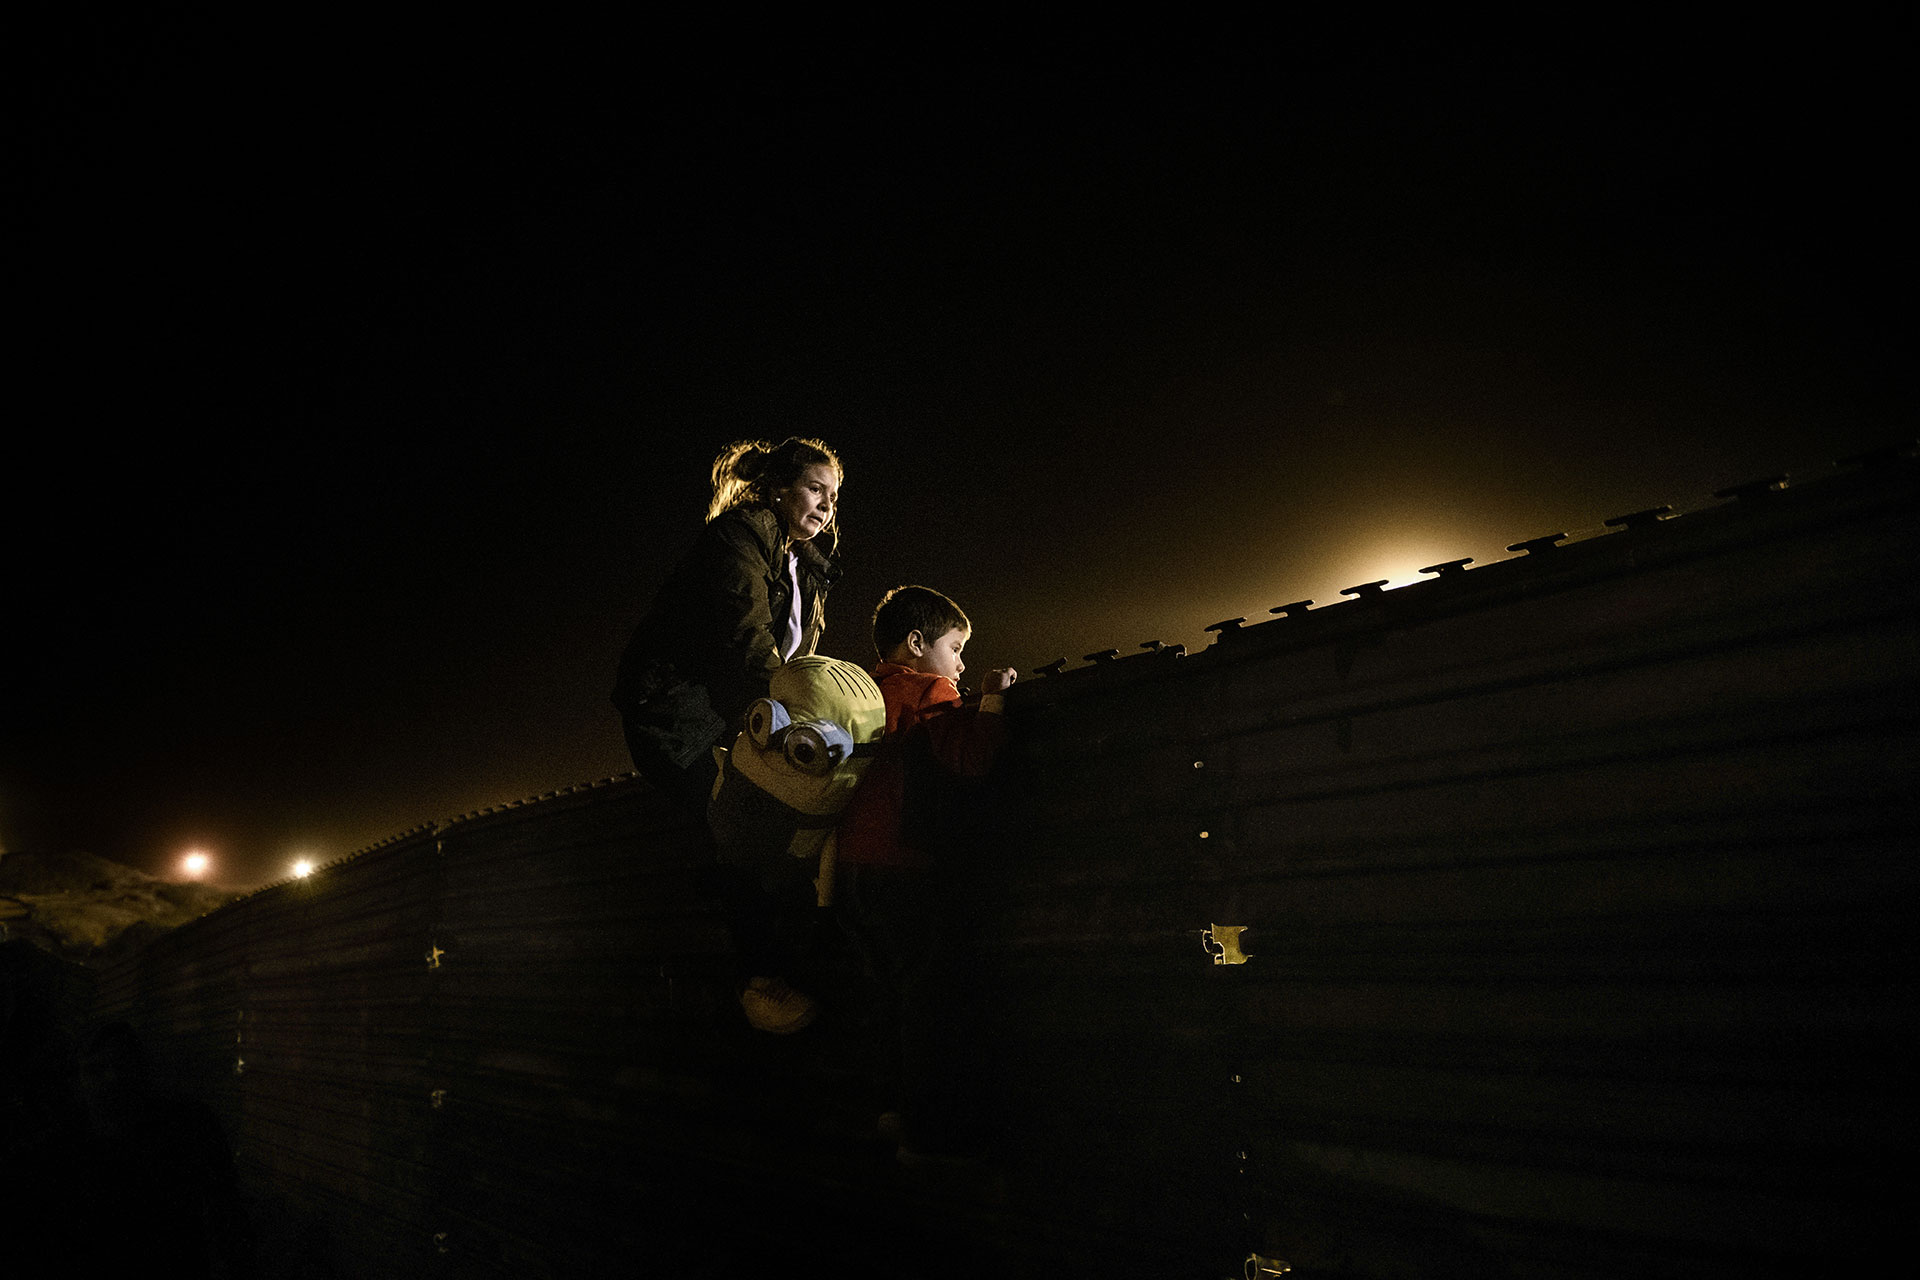 A Honduran mother and her son scale the wall to jump over to the U.S. from Tijuana on 26 December 2018.